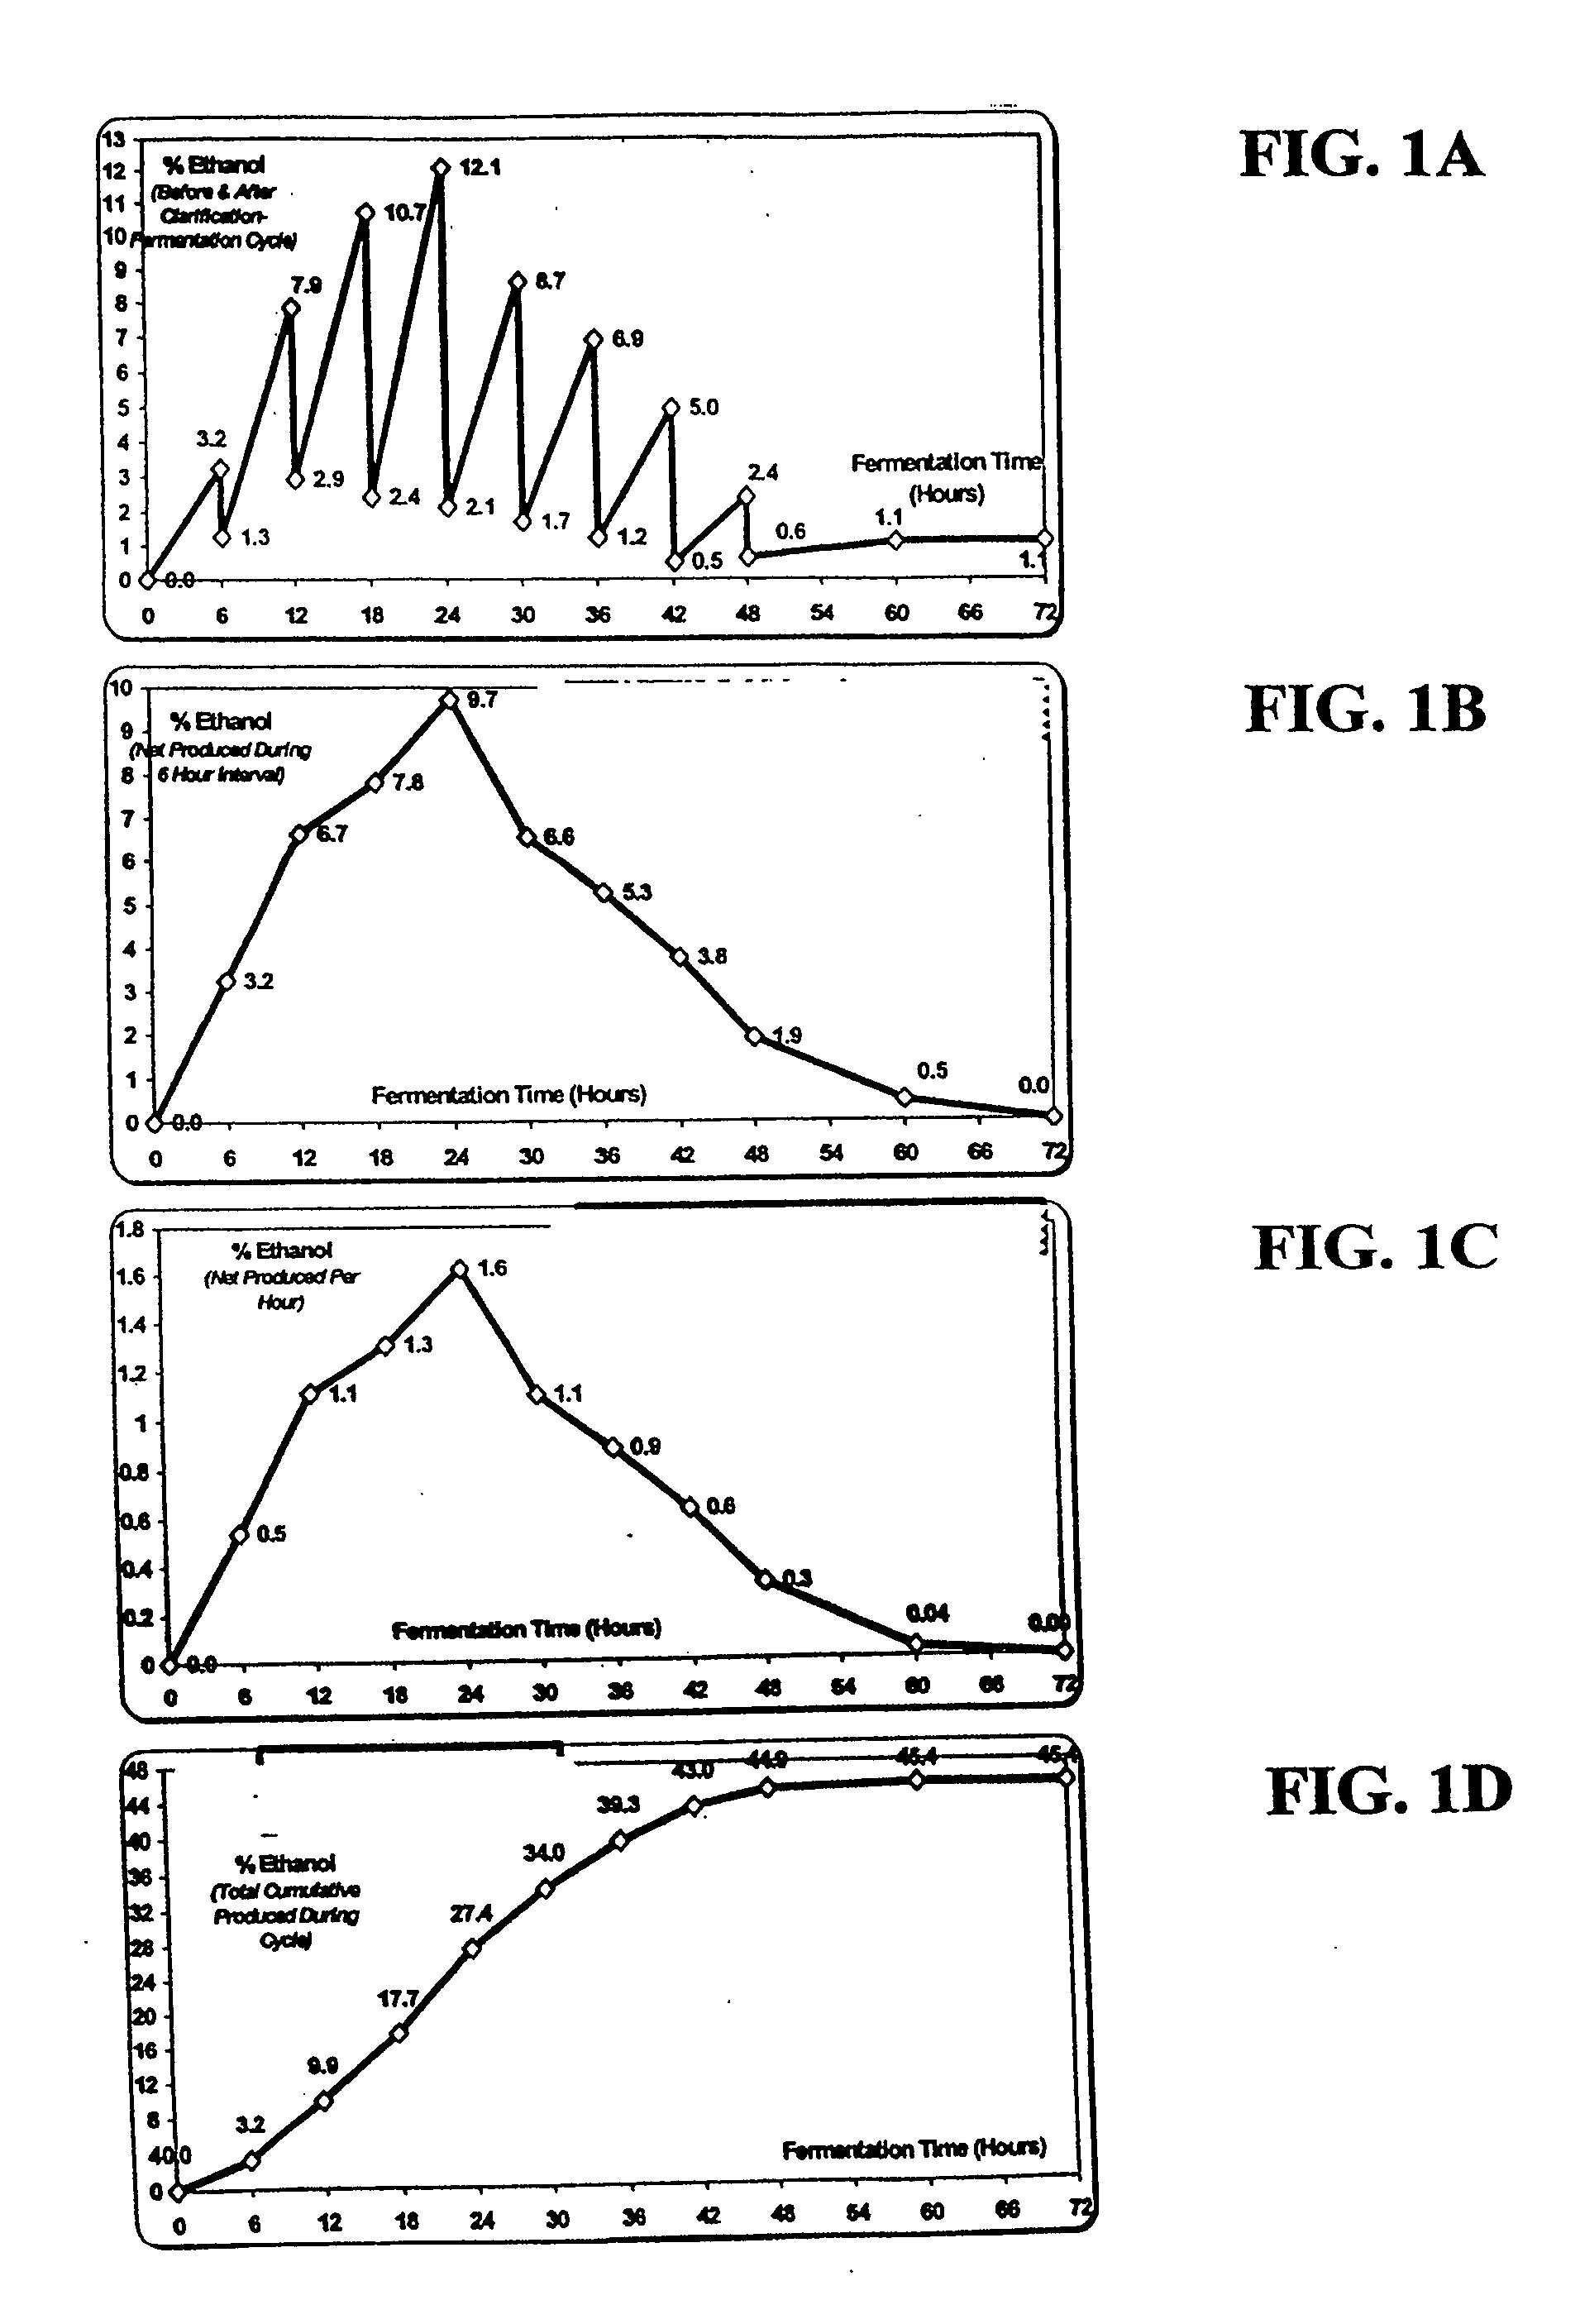 Continuous process for producing ethanol using raw starch